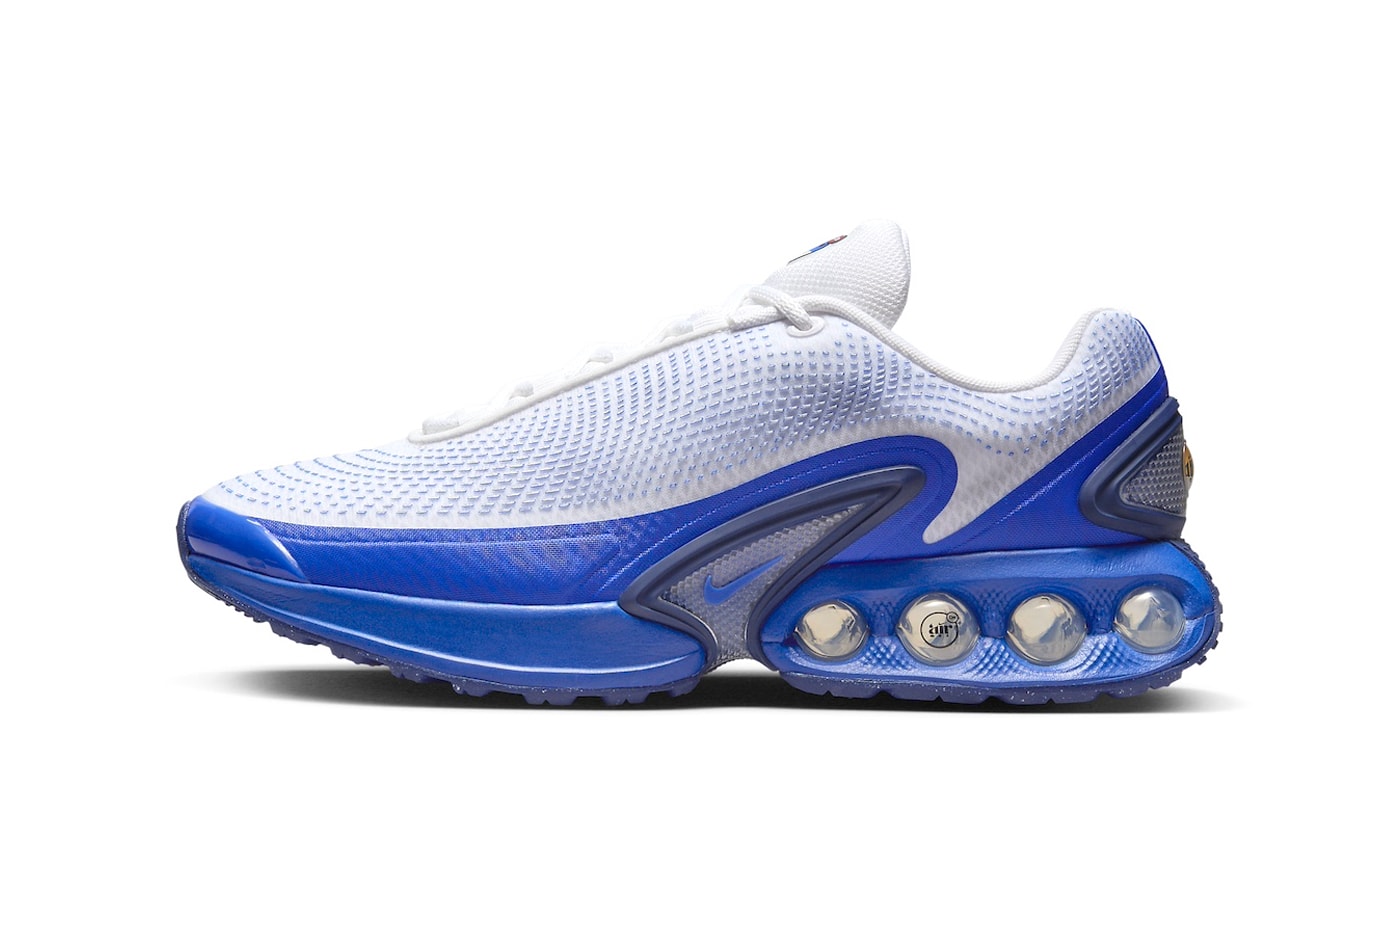 Official Look at the Nike Air Max Dn "White/Racer Blue" White/Blue Void-Racer Blue DV3337-102 swoosh technical mesh sneaker